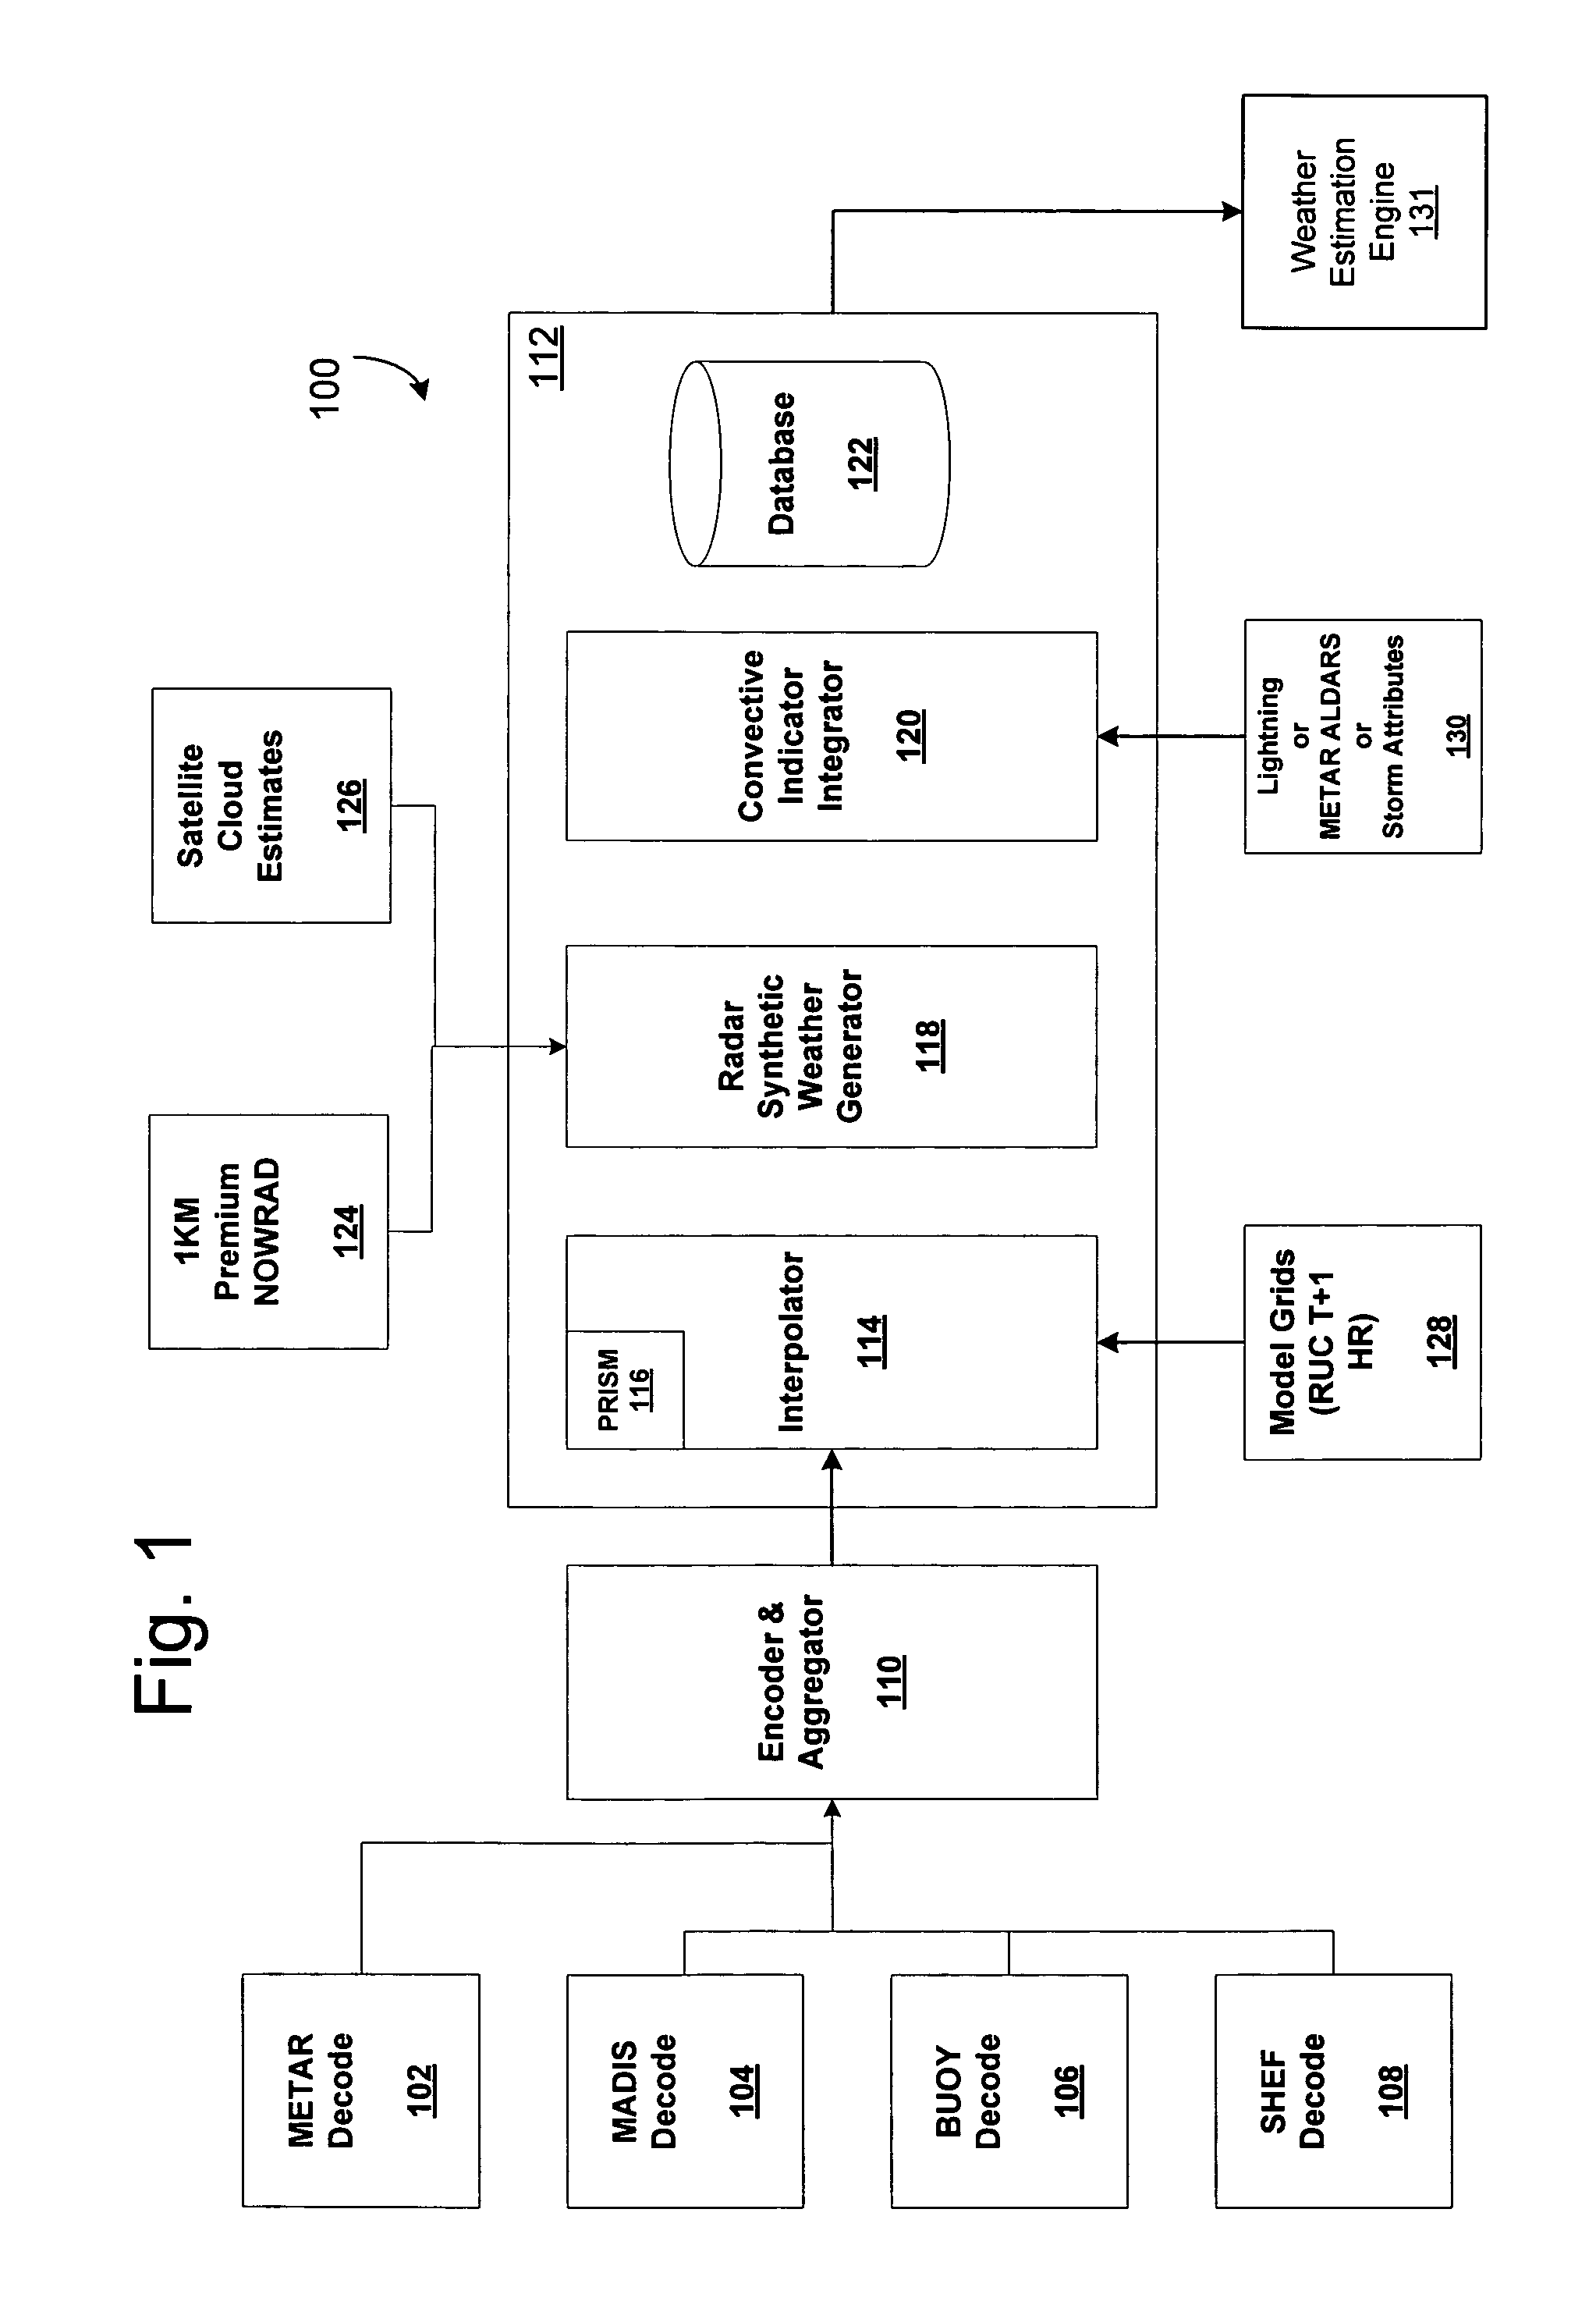 System for producing high-resolution, real-time synthetic meteorological conditions for a specified location